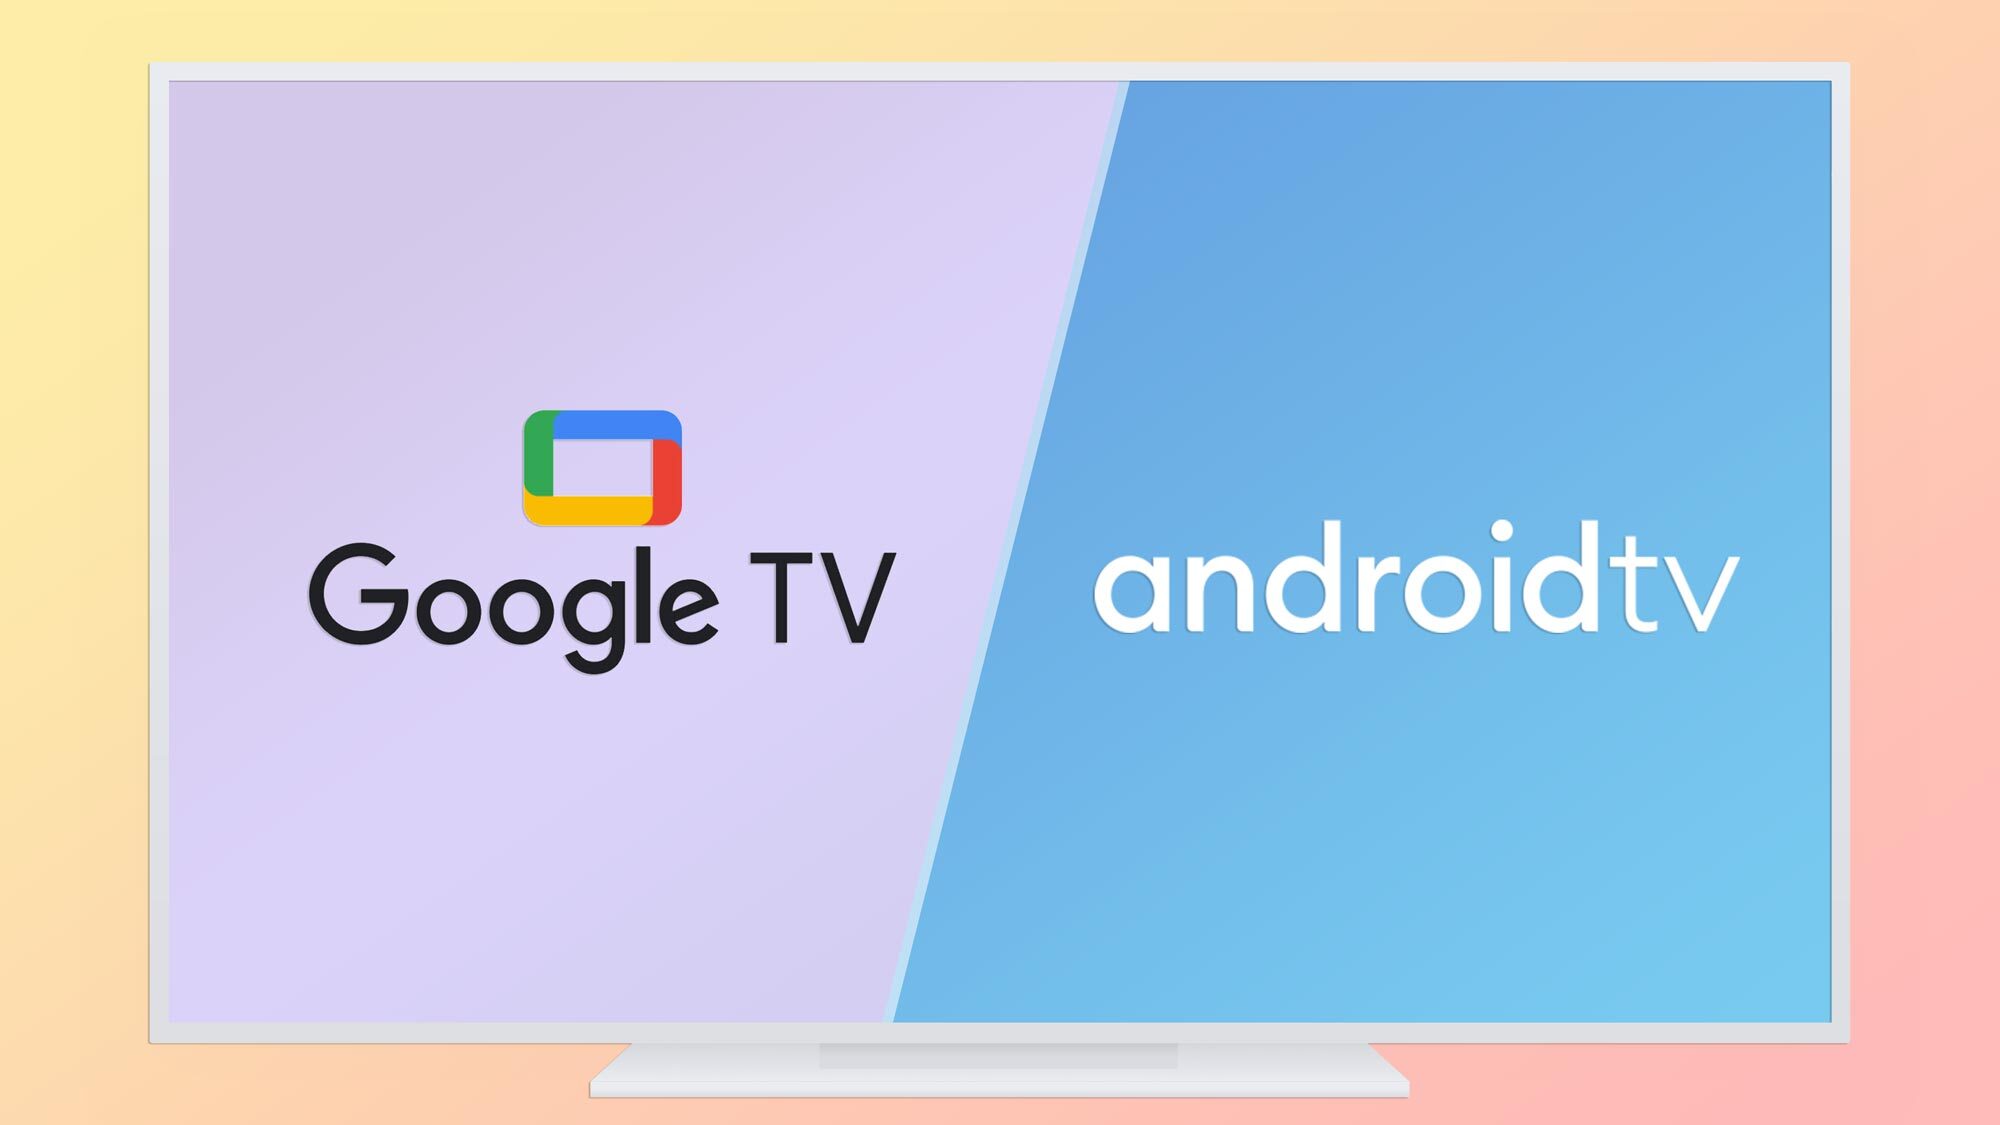 Google TV vs Android TV: Features and functions compared